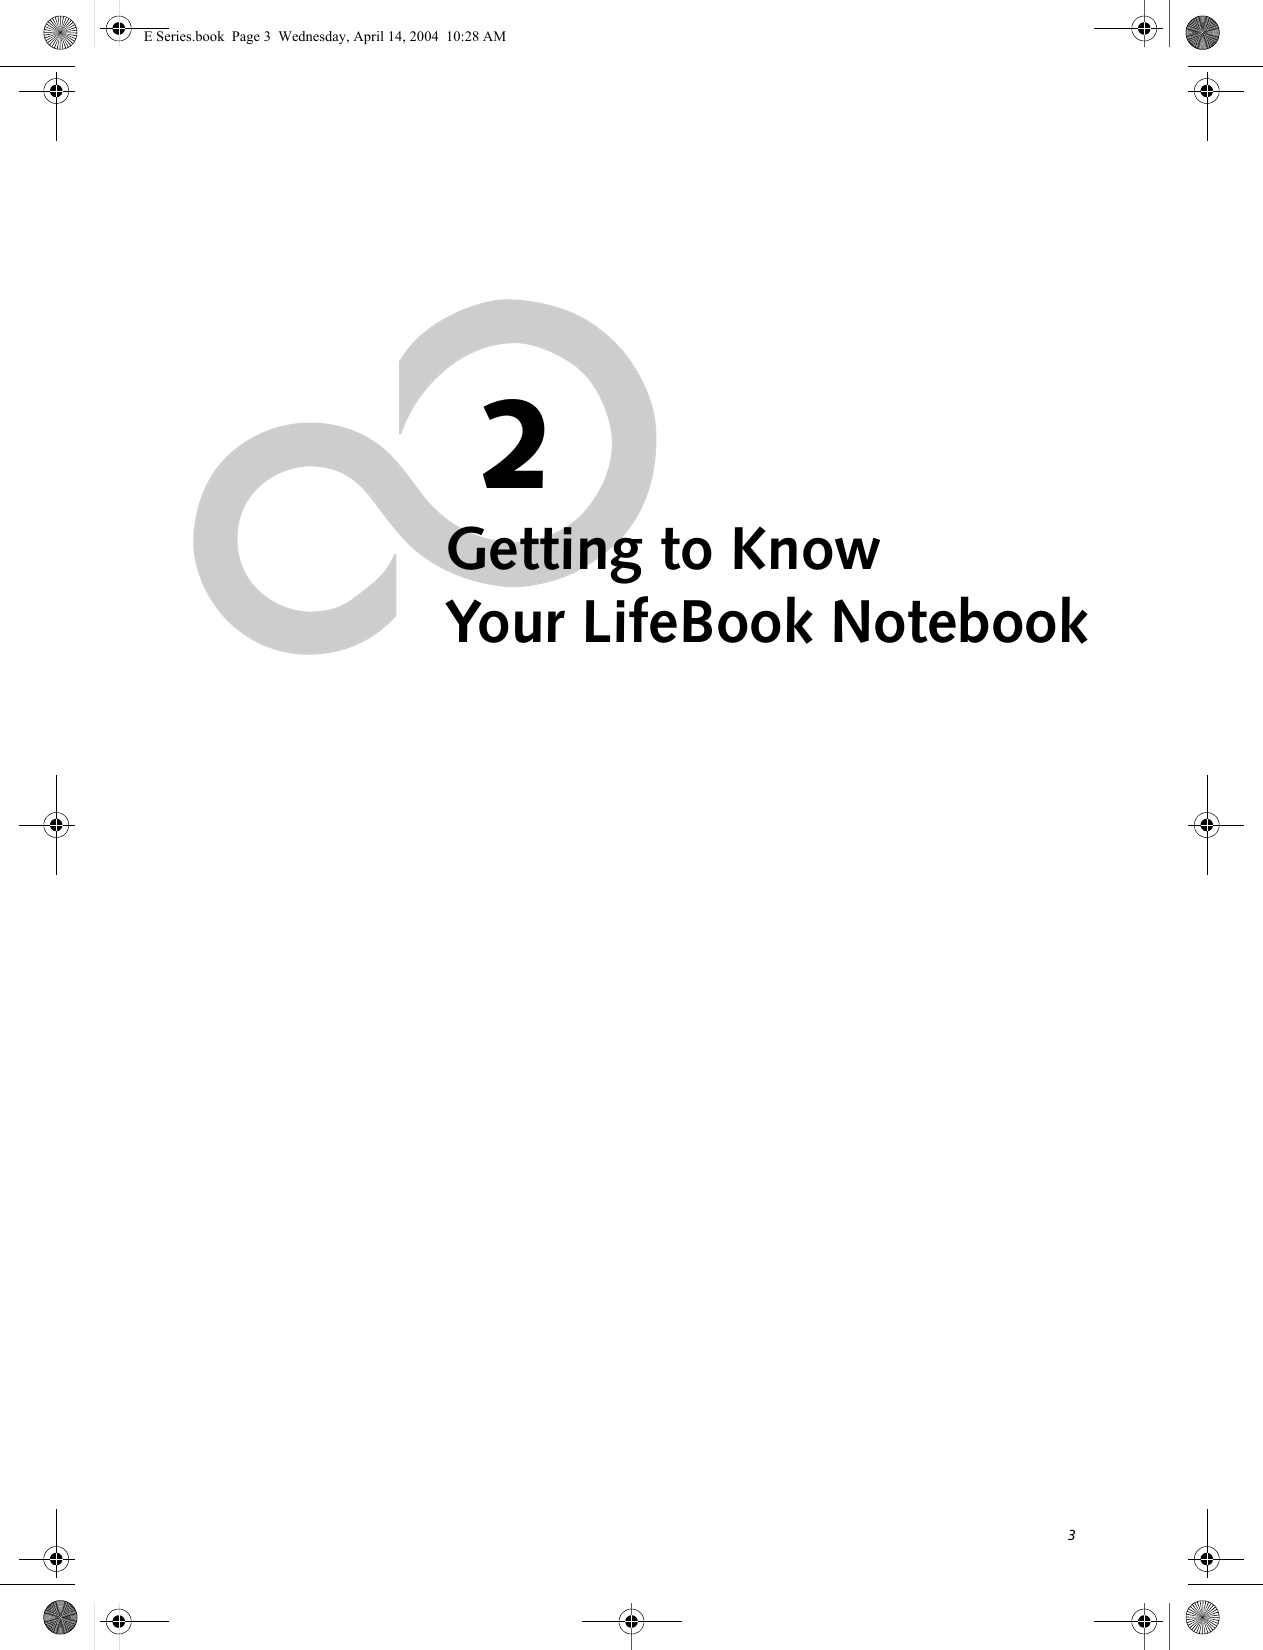 32Getting to KnowYour LifeBook NotebookE Series.book  Page 3  Wednesday, April 14, 2004  10:28 AM